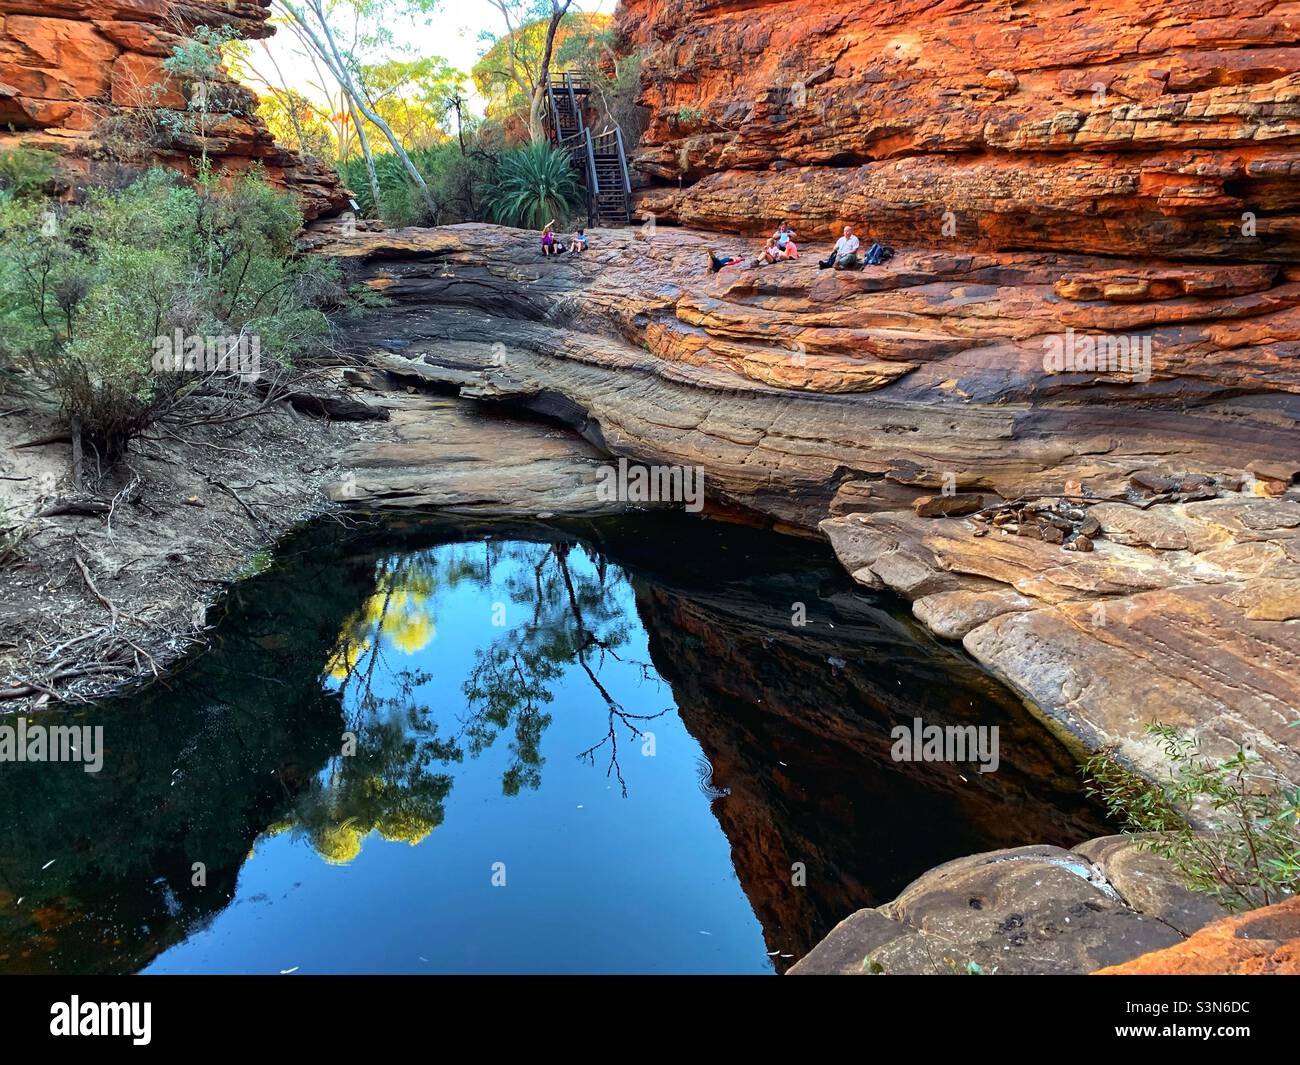 Hikers relax at a waterhole deep in Kings Canyon, Northern Territory, Australia Stock Photo